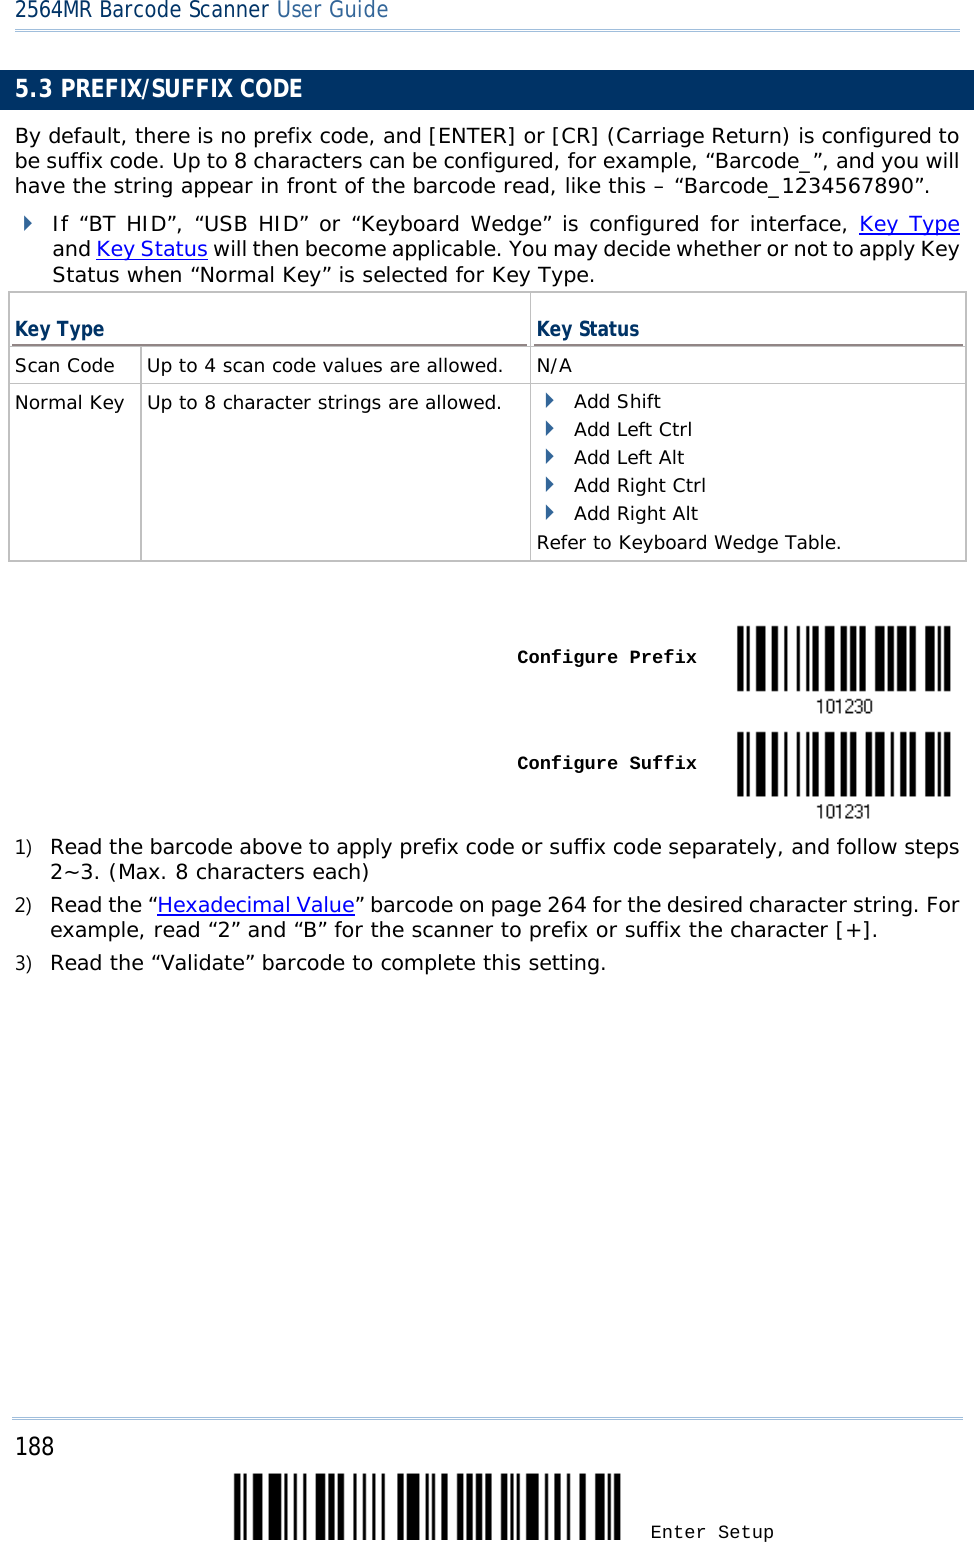 2564MR Barcode Scanner User Guide  5.3 PREFIX/SUFFIX CODE By default, there is no prefix code, and [ENTER] or [CR] (Carriage Return) is configured to be suffix code. Up to 8 characters can be configured, for example, “Barcode_”, and you will have the string appear in front of the barcode read, like this – “Barcode_1234567890”.  If “BT HID”, “USB HID” or “Keyboard Wedge” is configured for interface, Key Type and Key Status will then become applicable. You may decide whether or not to apply Key Status when “Normal Key” is selected for Key Type. Key Type Key Status Scan Code  Up to 4 scan code values are allowed. N/A Normal Key  Up to 8 character strings are allowed.  Add Shift  Add Left Ctrl  Add Left Alt  Add Right Ctrl  Add Right Alt Refer to Keyboard Wedge Table.      Configure Prefix     Configure Suffix  1) Read the barcode above to apply prefix code or suffix code separately, and follow steps 2~3. (Max. 8 characters each) 2) Read the “Hexadecimal Value” barcode on page 264 for the desired character string. For example, read “2” and “B” for the scanner to prefix or suffix the character [+]. 3) Read the “Validate” barcode to complete this setting. 188 Enter Setup 